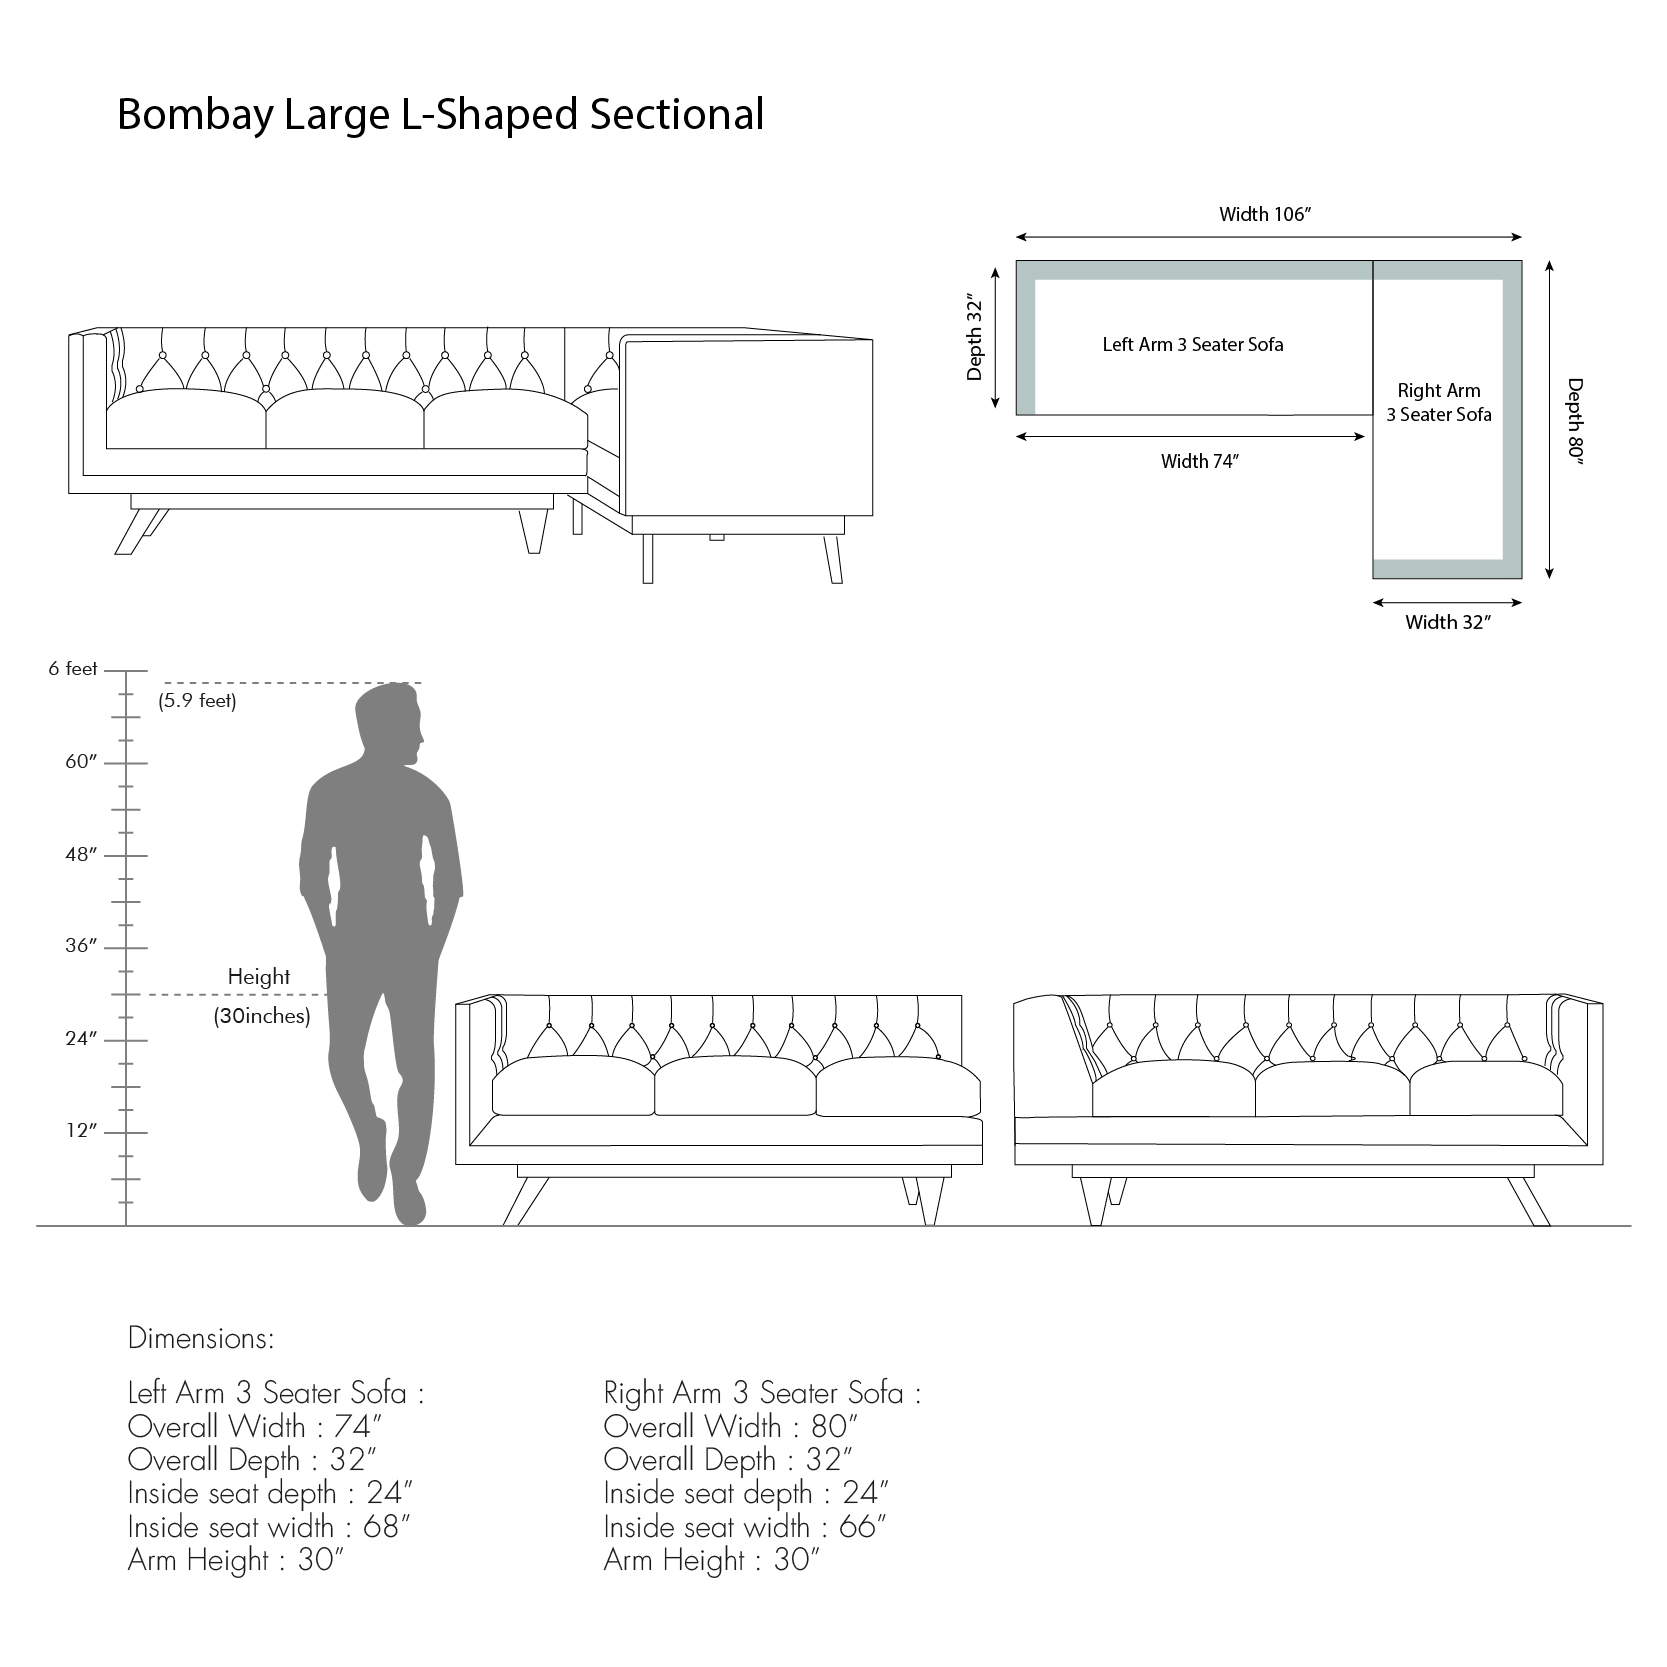 Bombay Large L-shaped Sectional